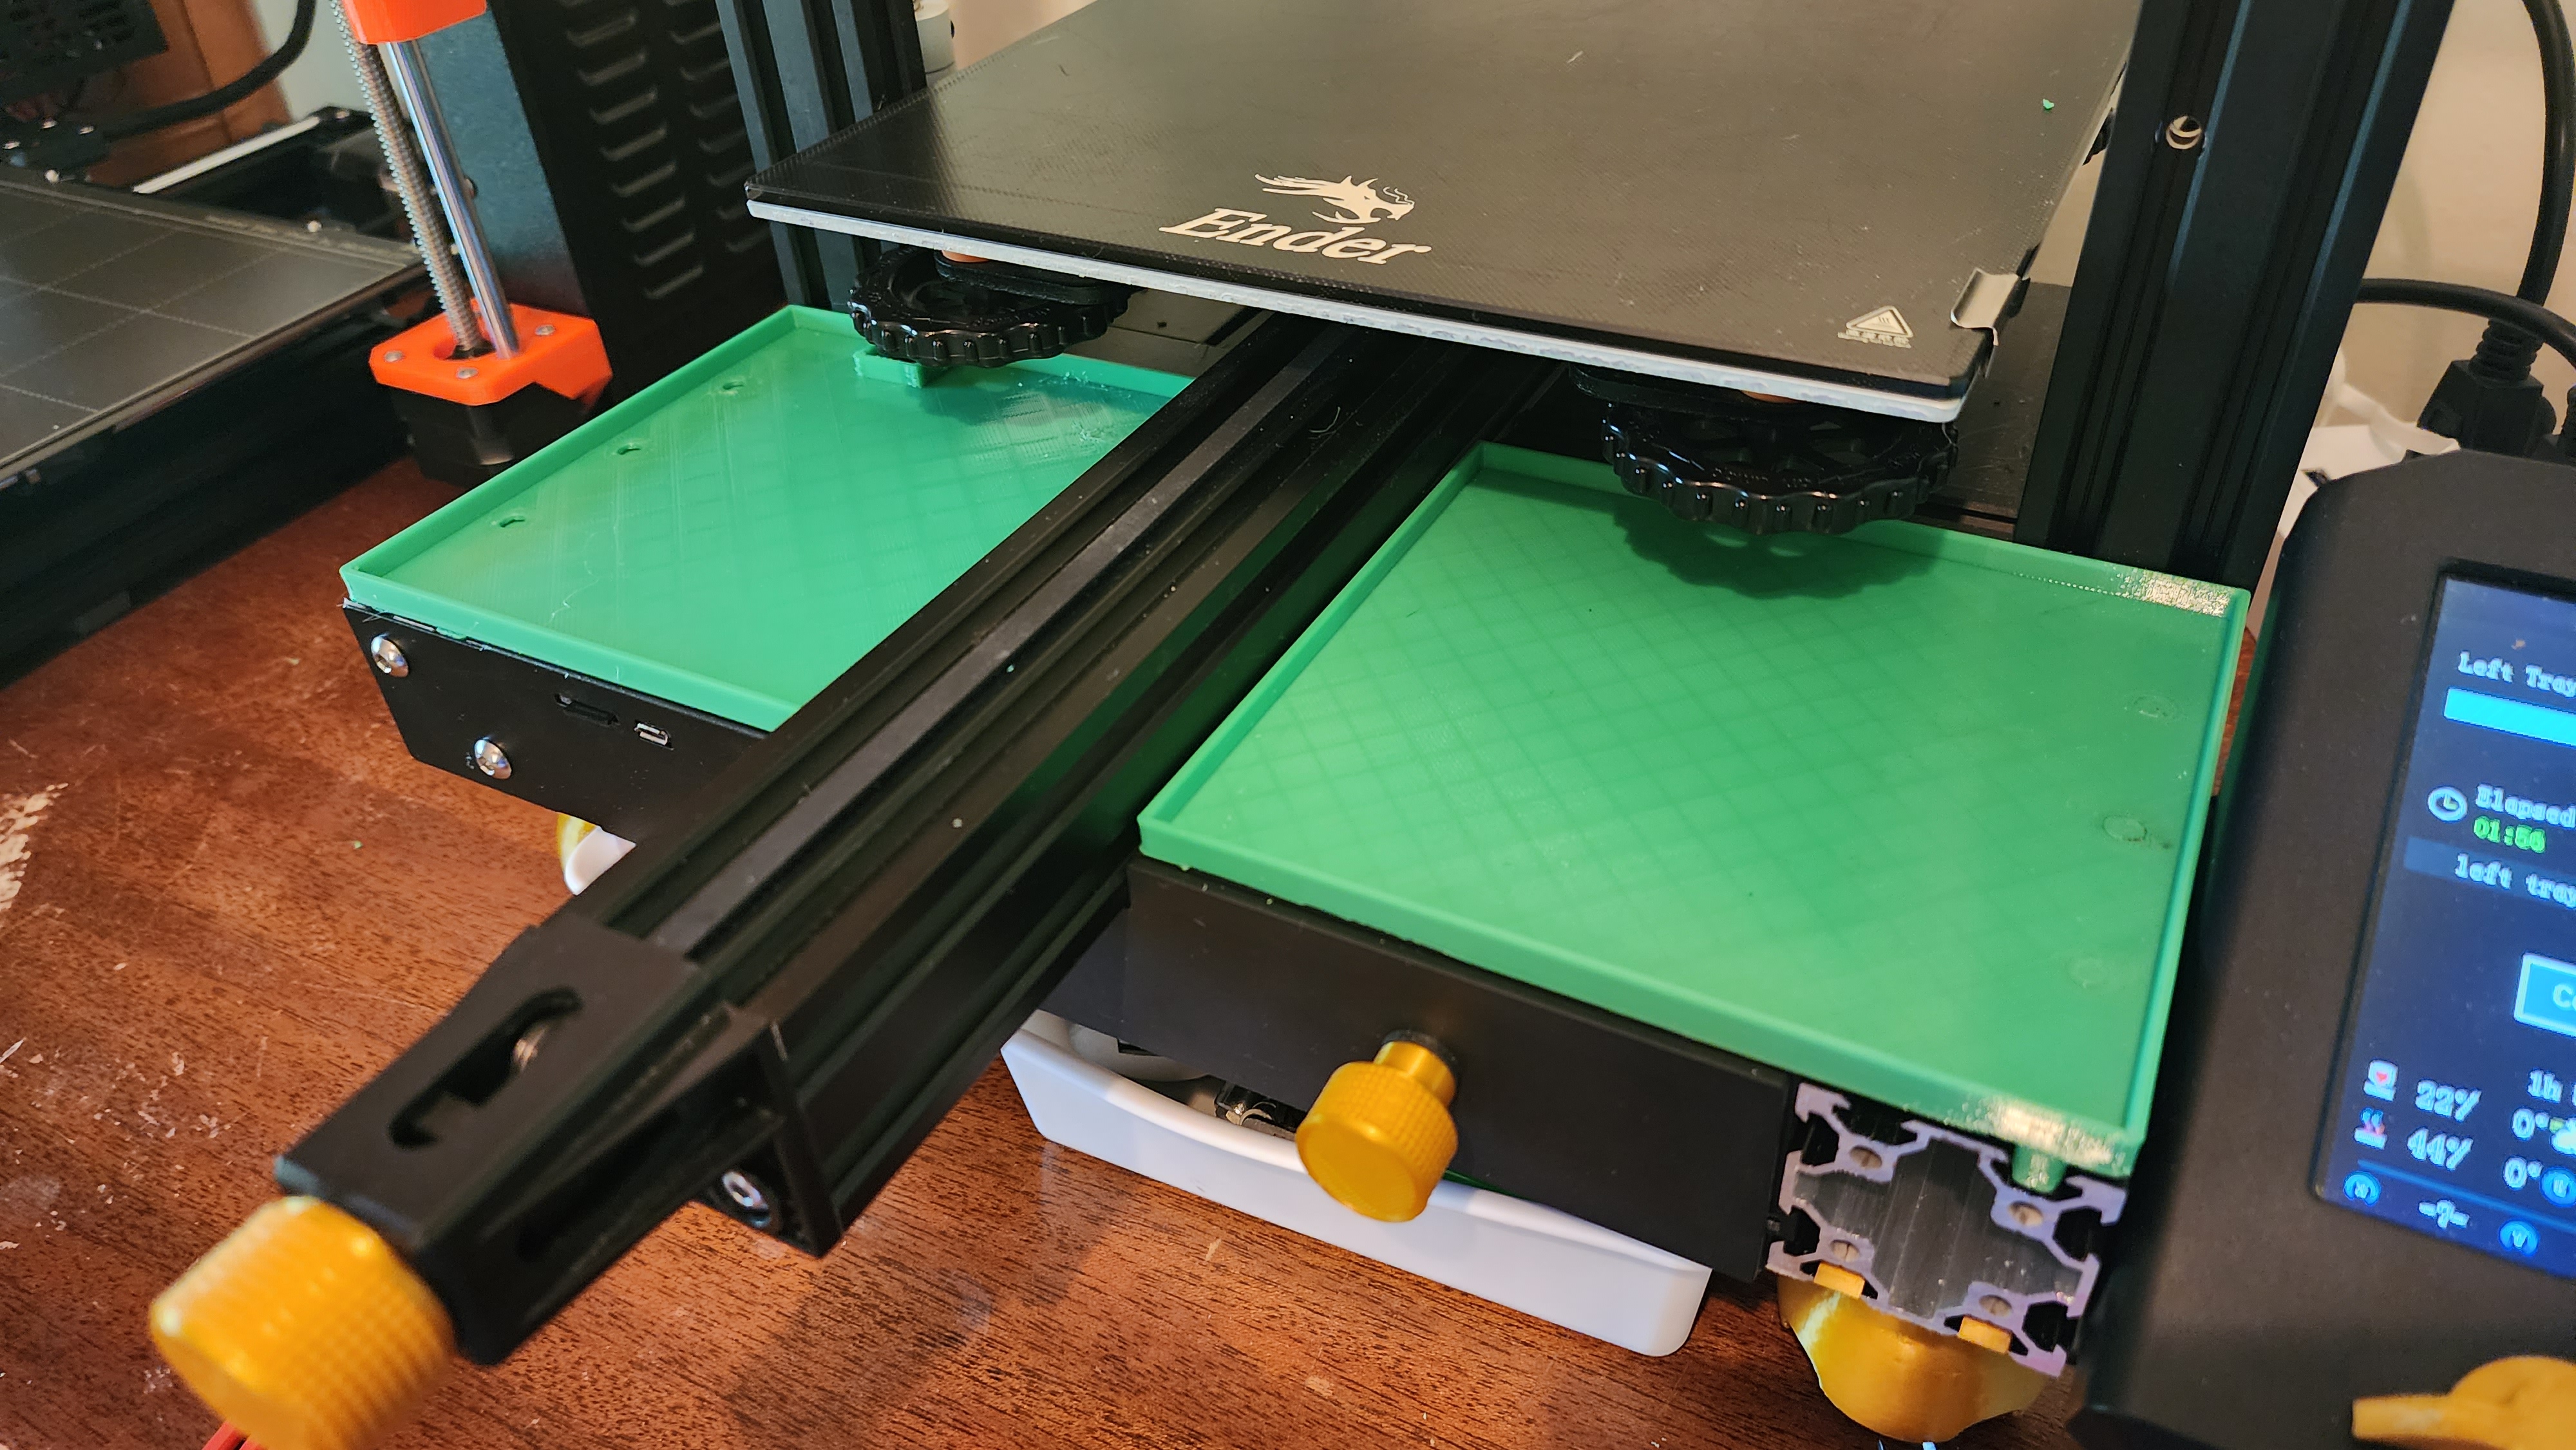 Ender 3v2 Shallow Tray For catching "bits" and "strings"